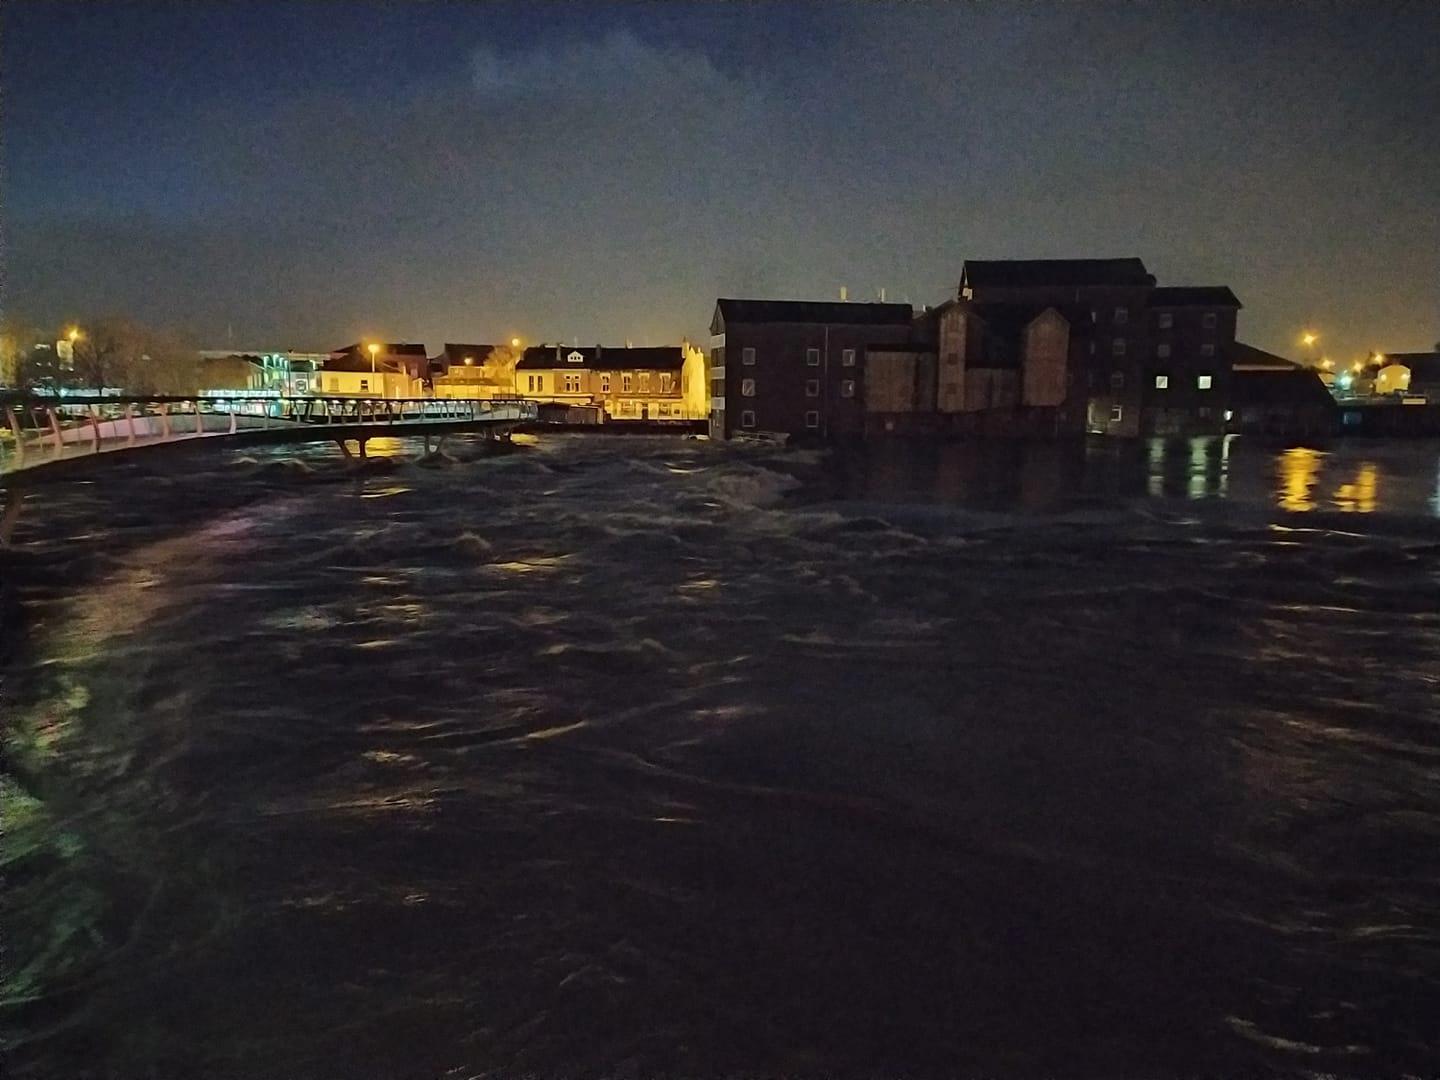 In Castleford, the River Aire came close to engulfing MIllenium Bridge. Several nearby roads, including Lock Lane, were closed in the hours following the storm.